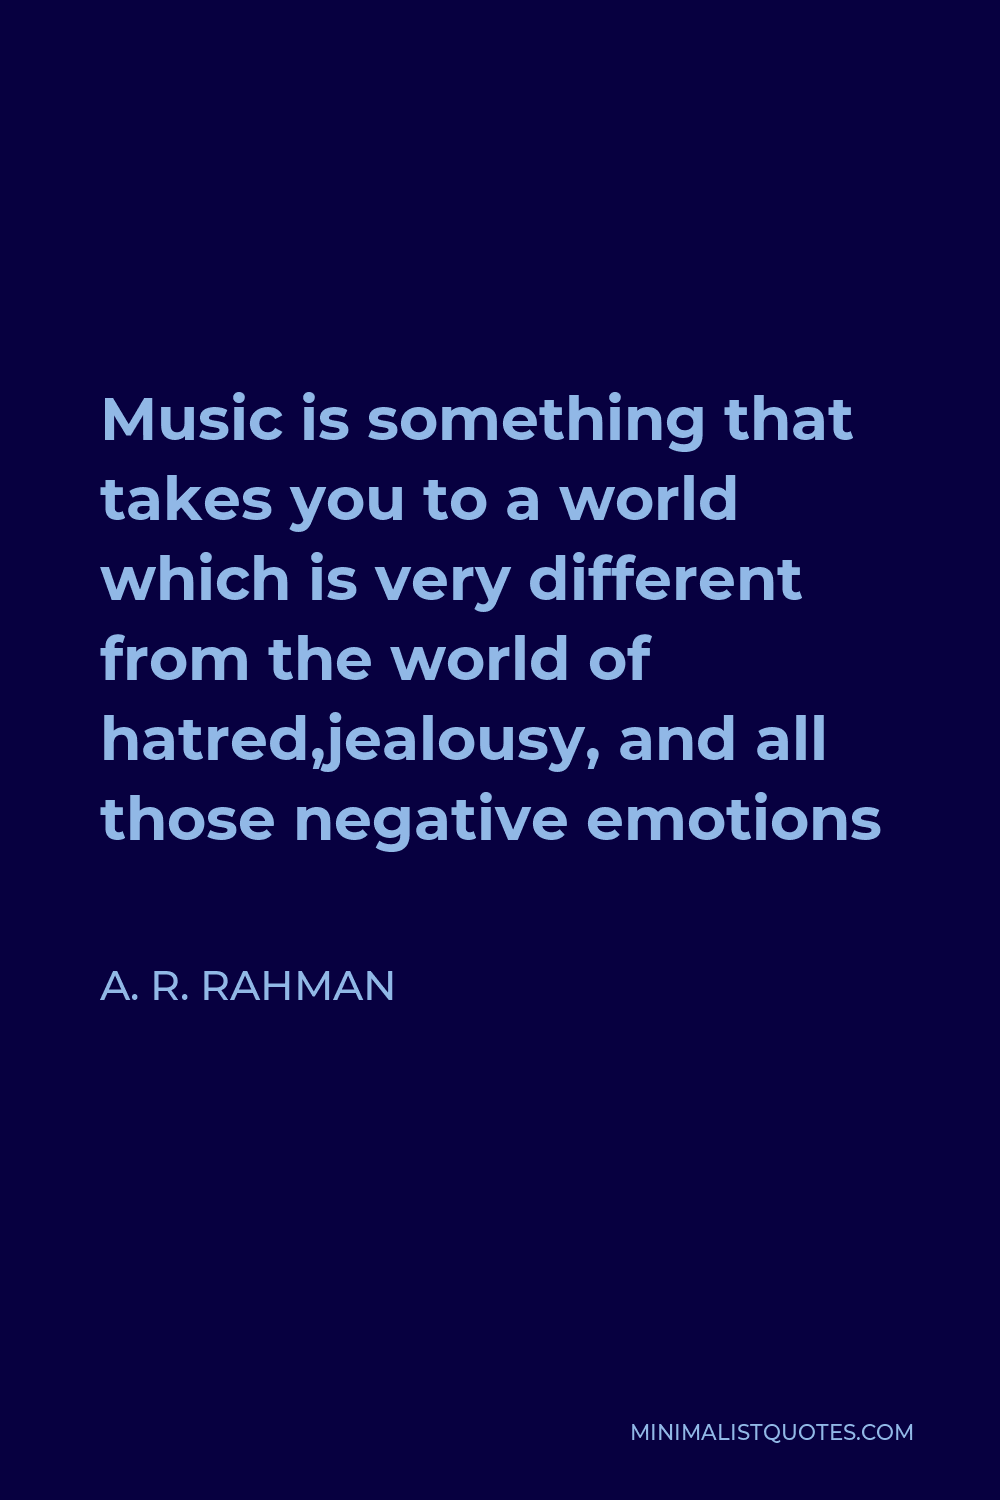 A. R. Rahman Quote - Music is something that takes you to a world which is very different from the world of hatred,jealousy, and all those negative emotions